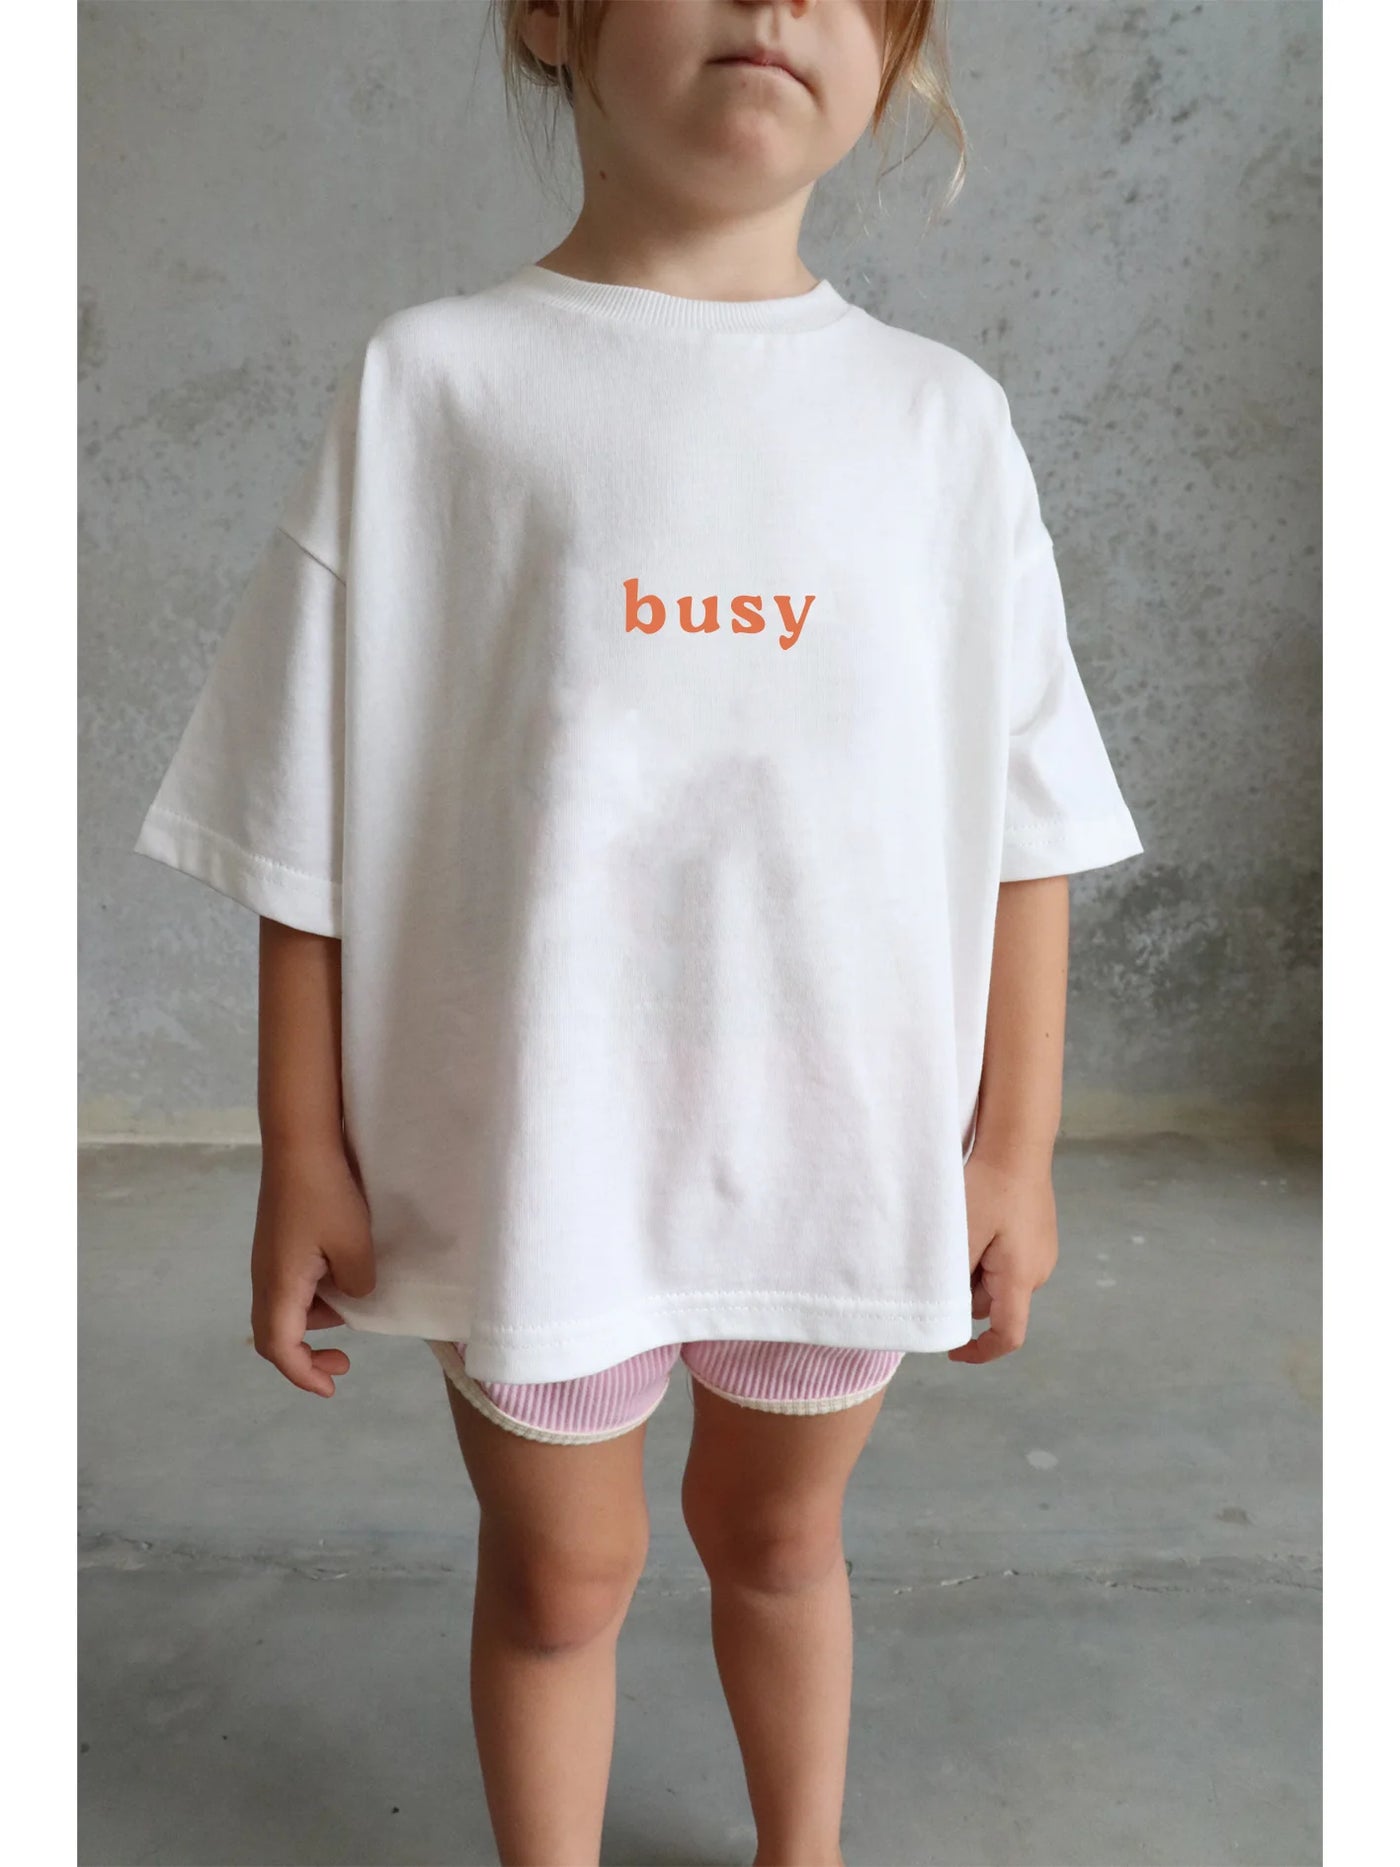 Busy Tee - Rose